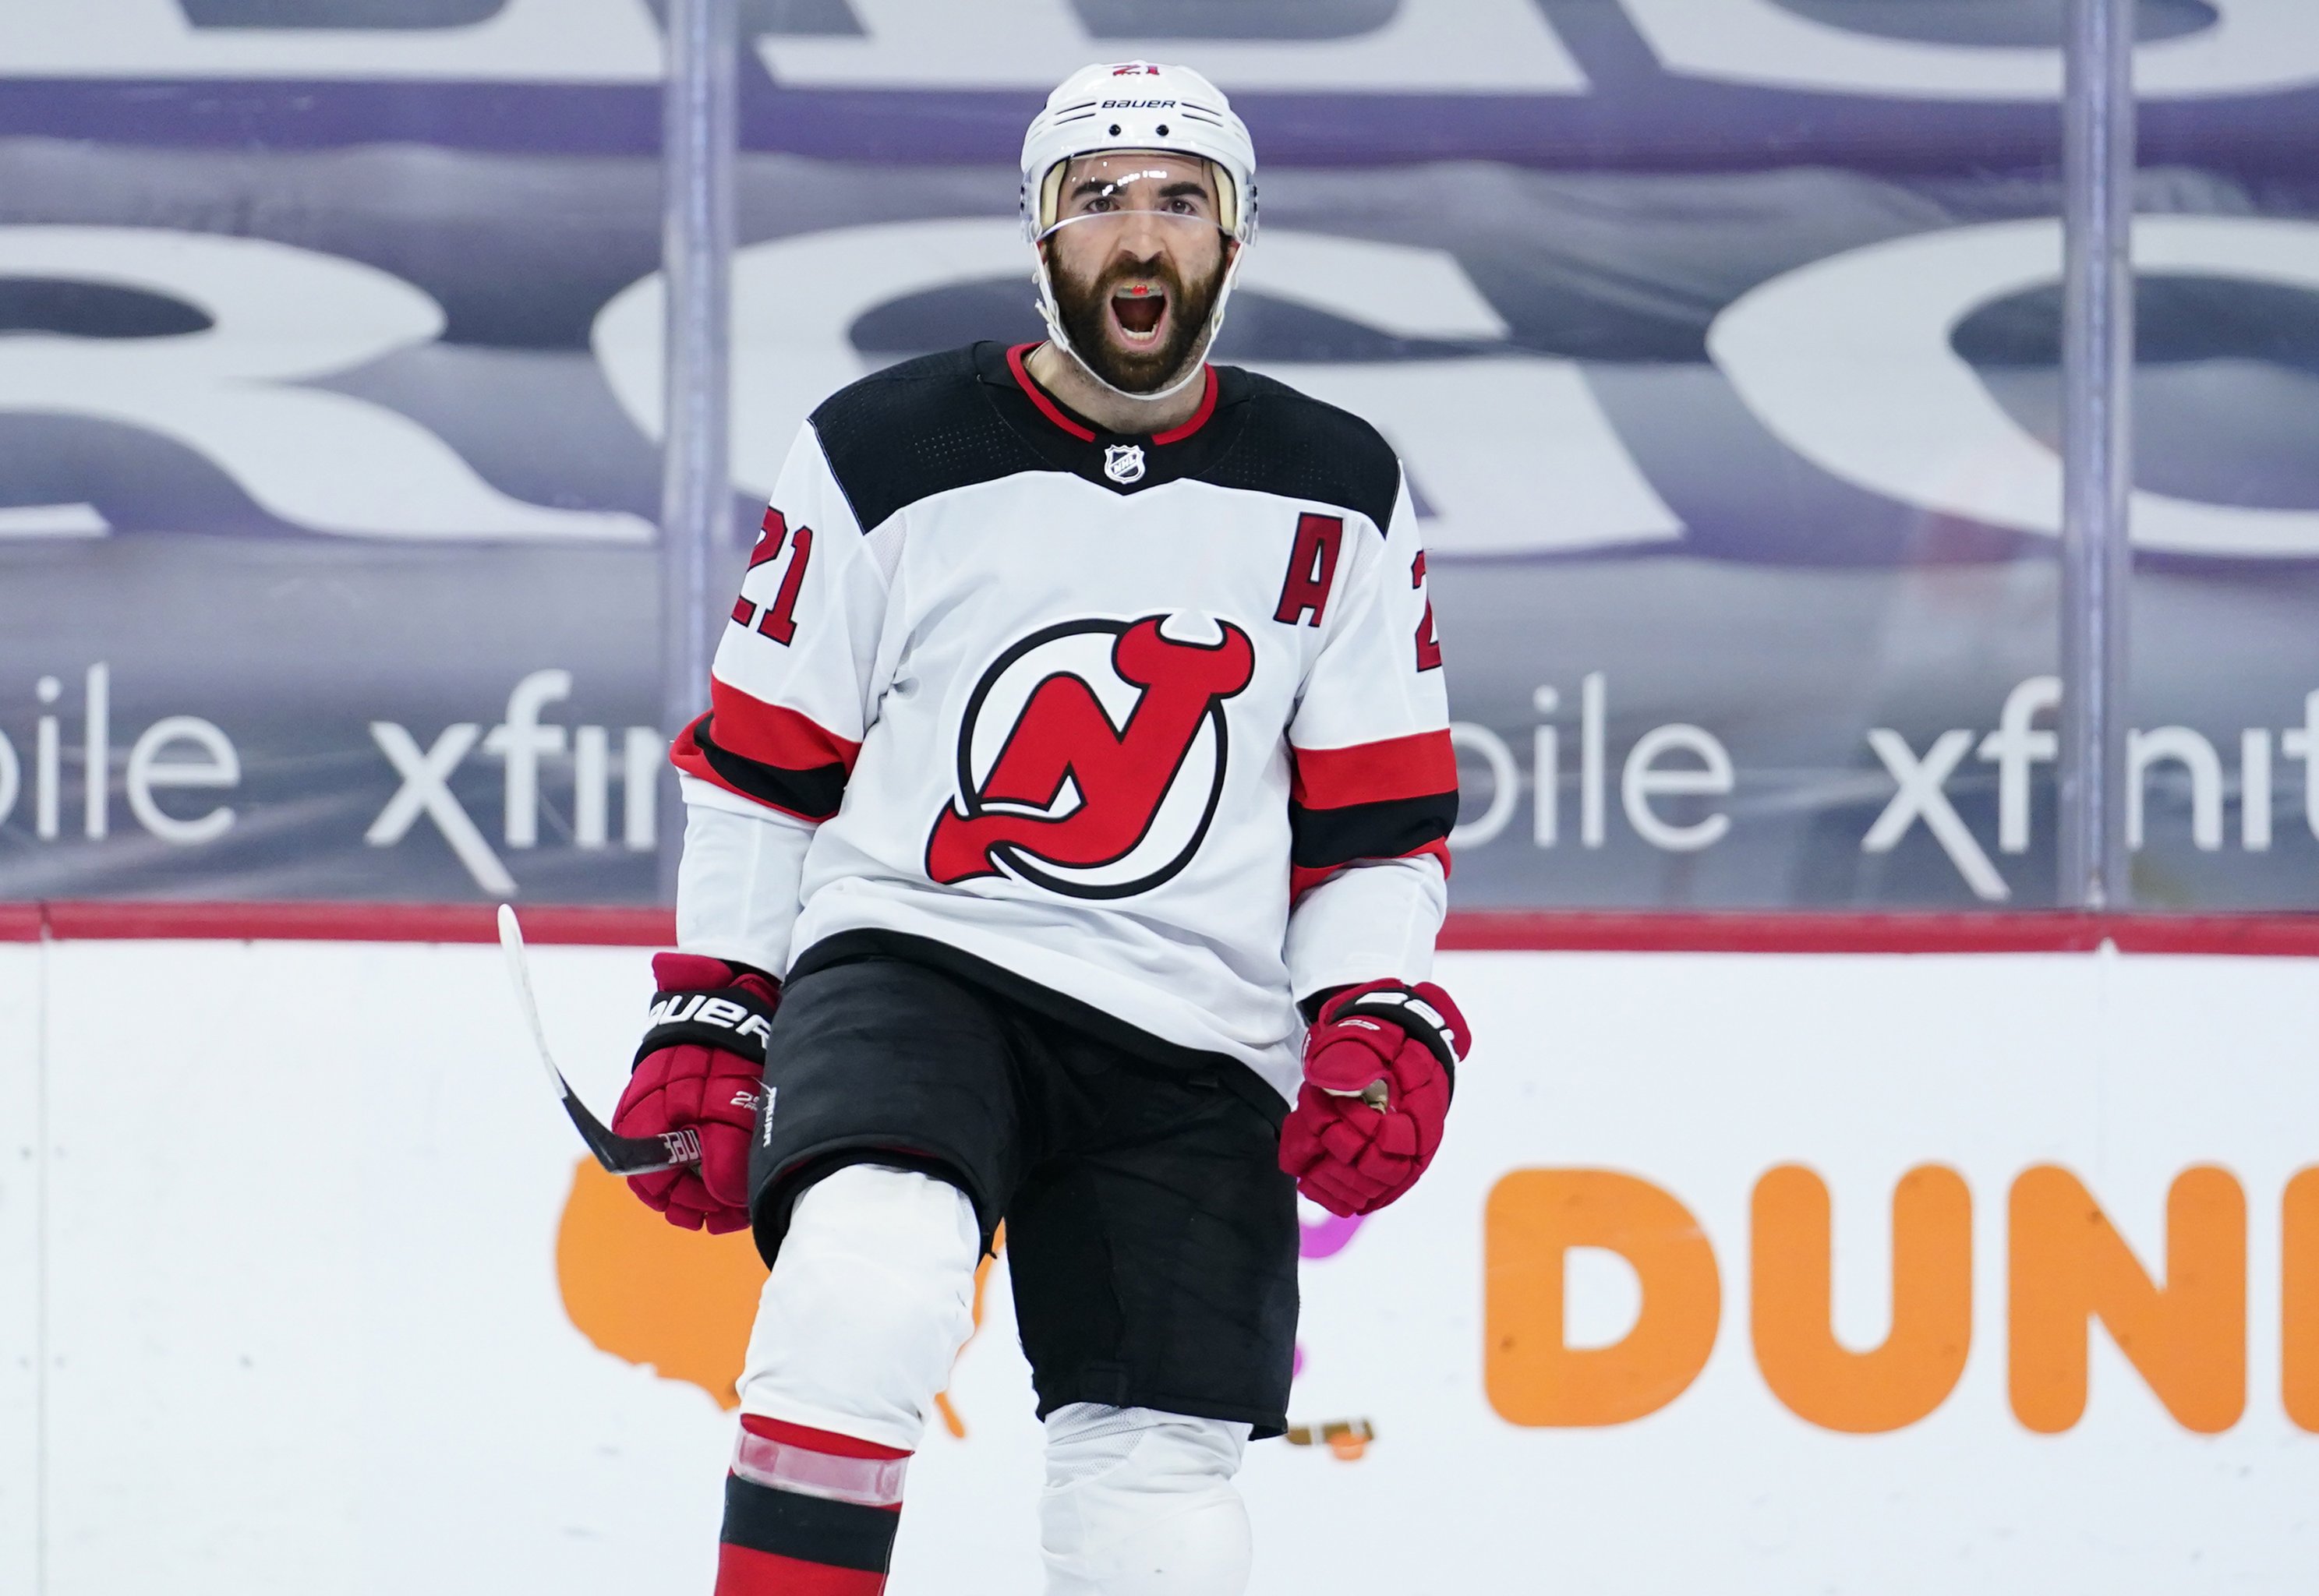 Nico Hischier injury: NJ Devils captain out after being hit with puck